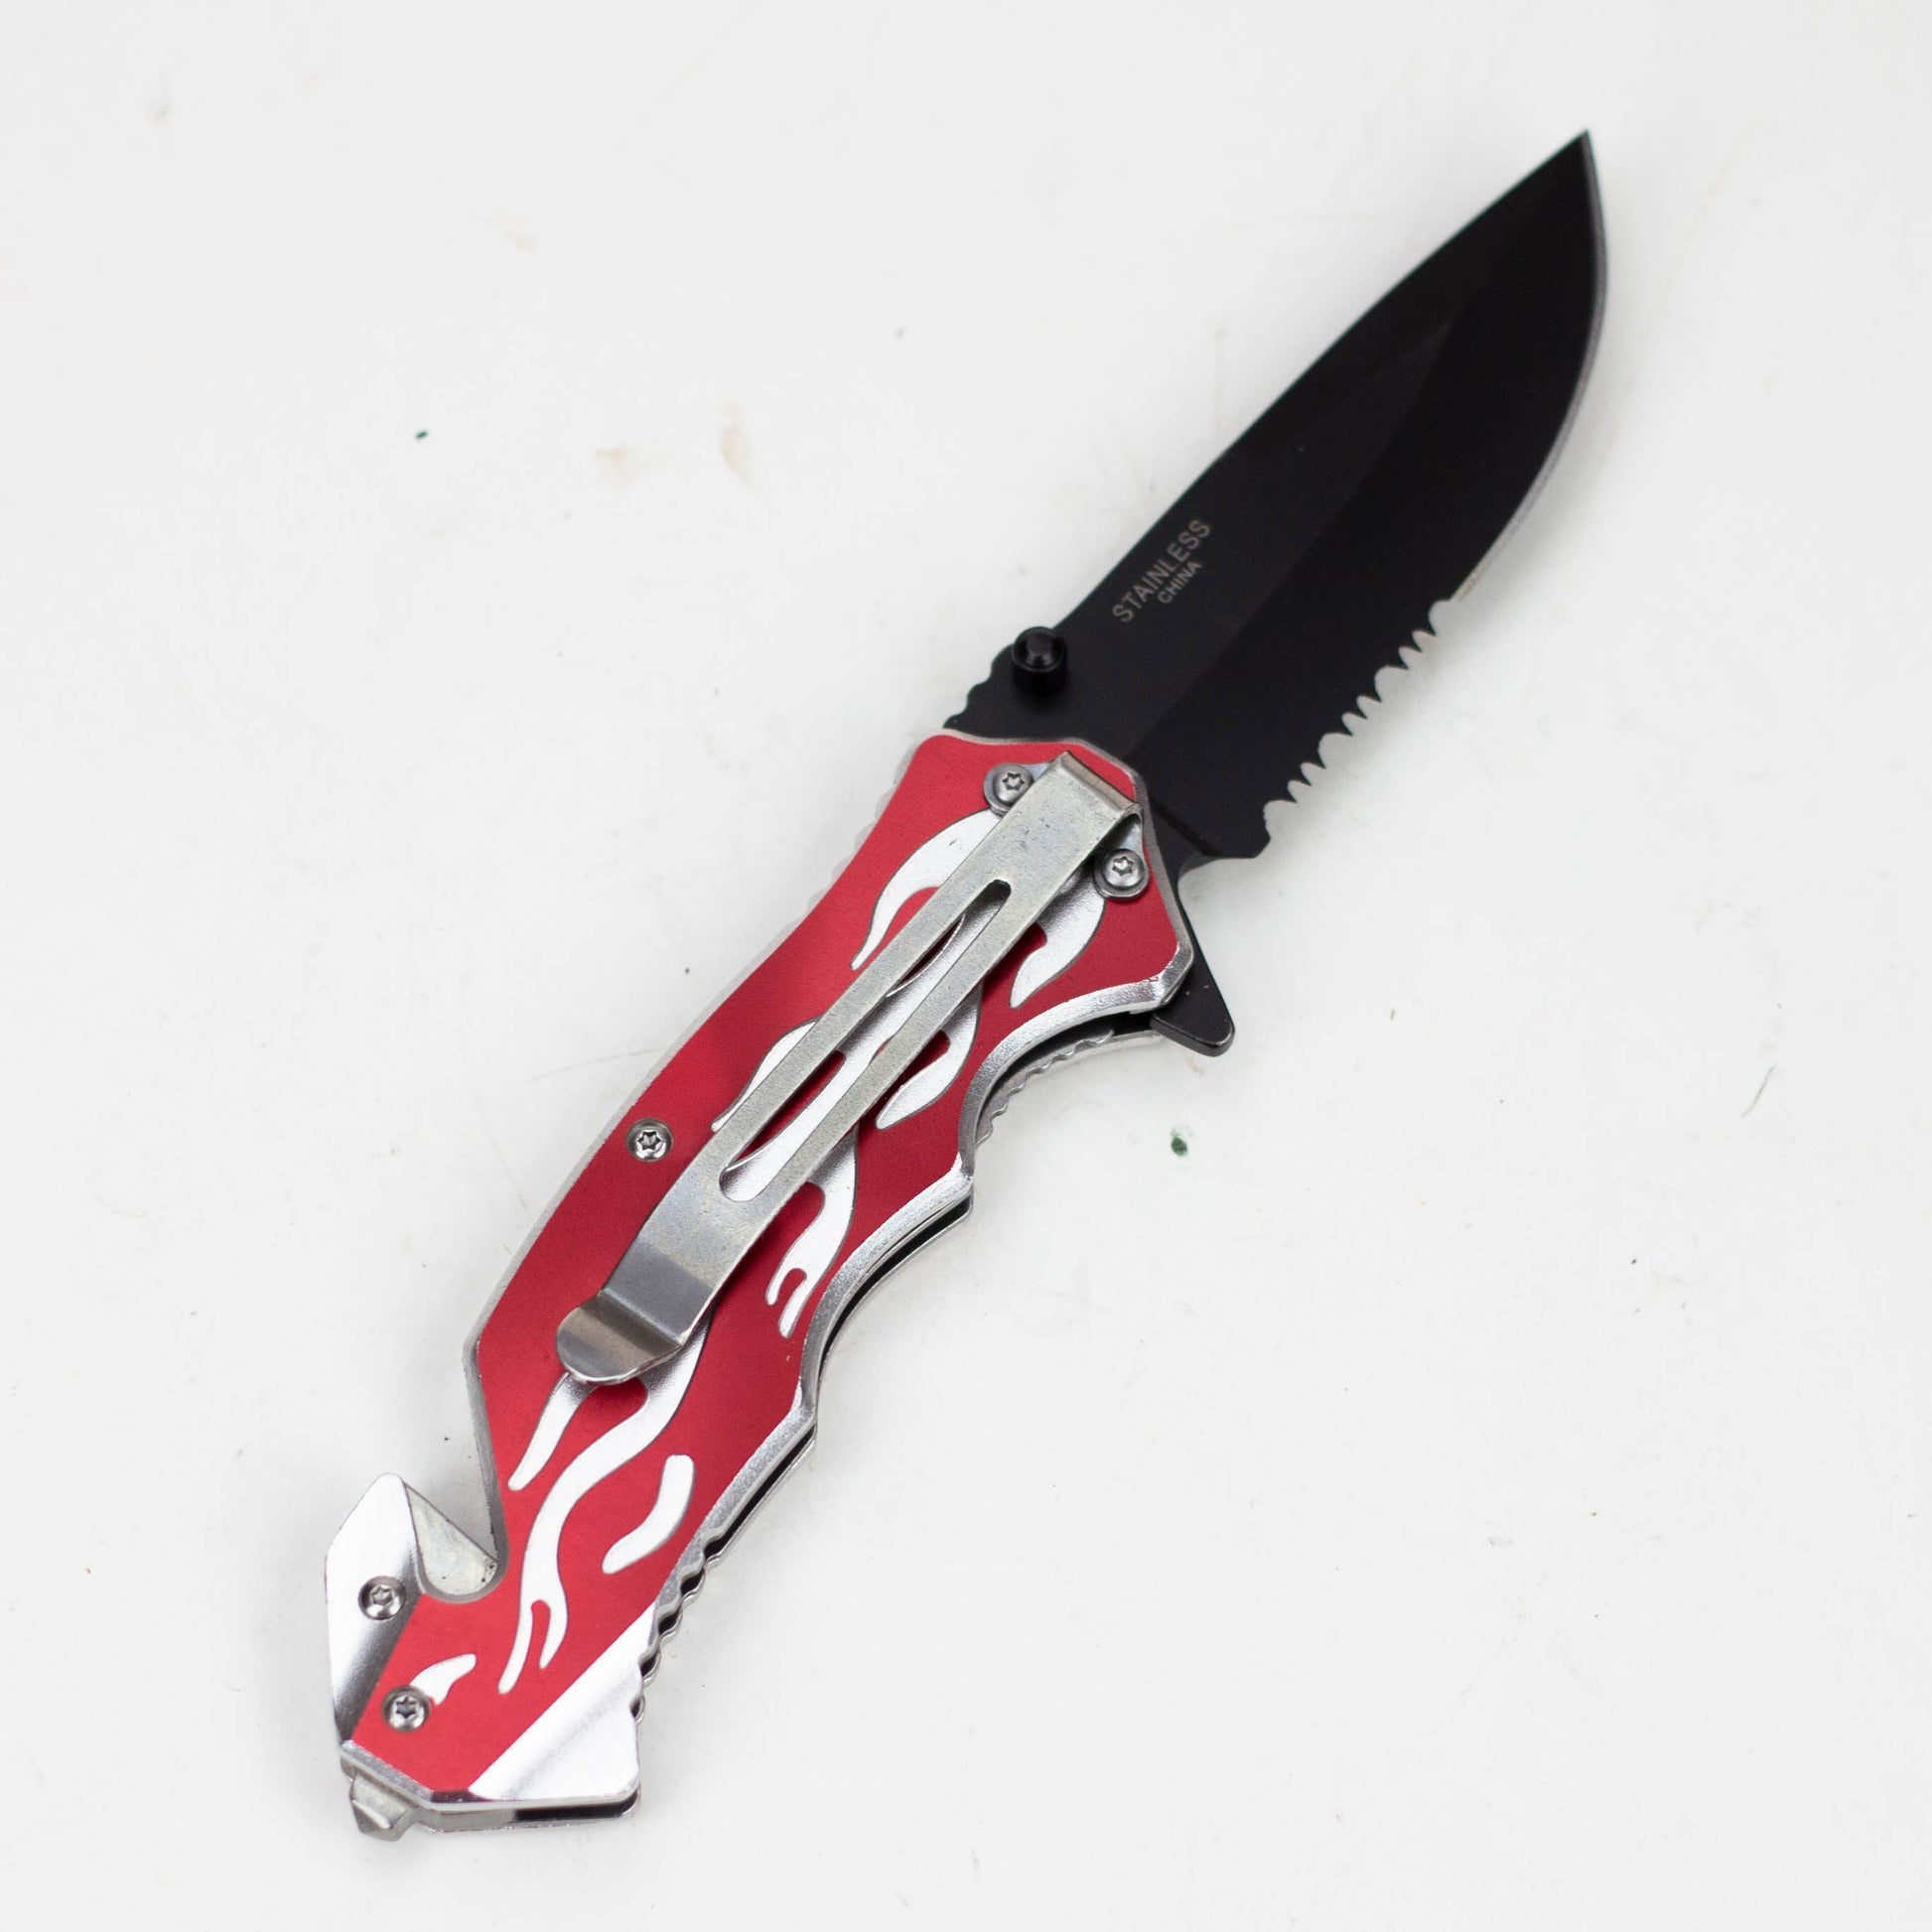 Defender-xtreme  Flame Design - Knife with Serrated Stainless Steel  Blade [7970]_2